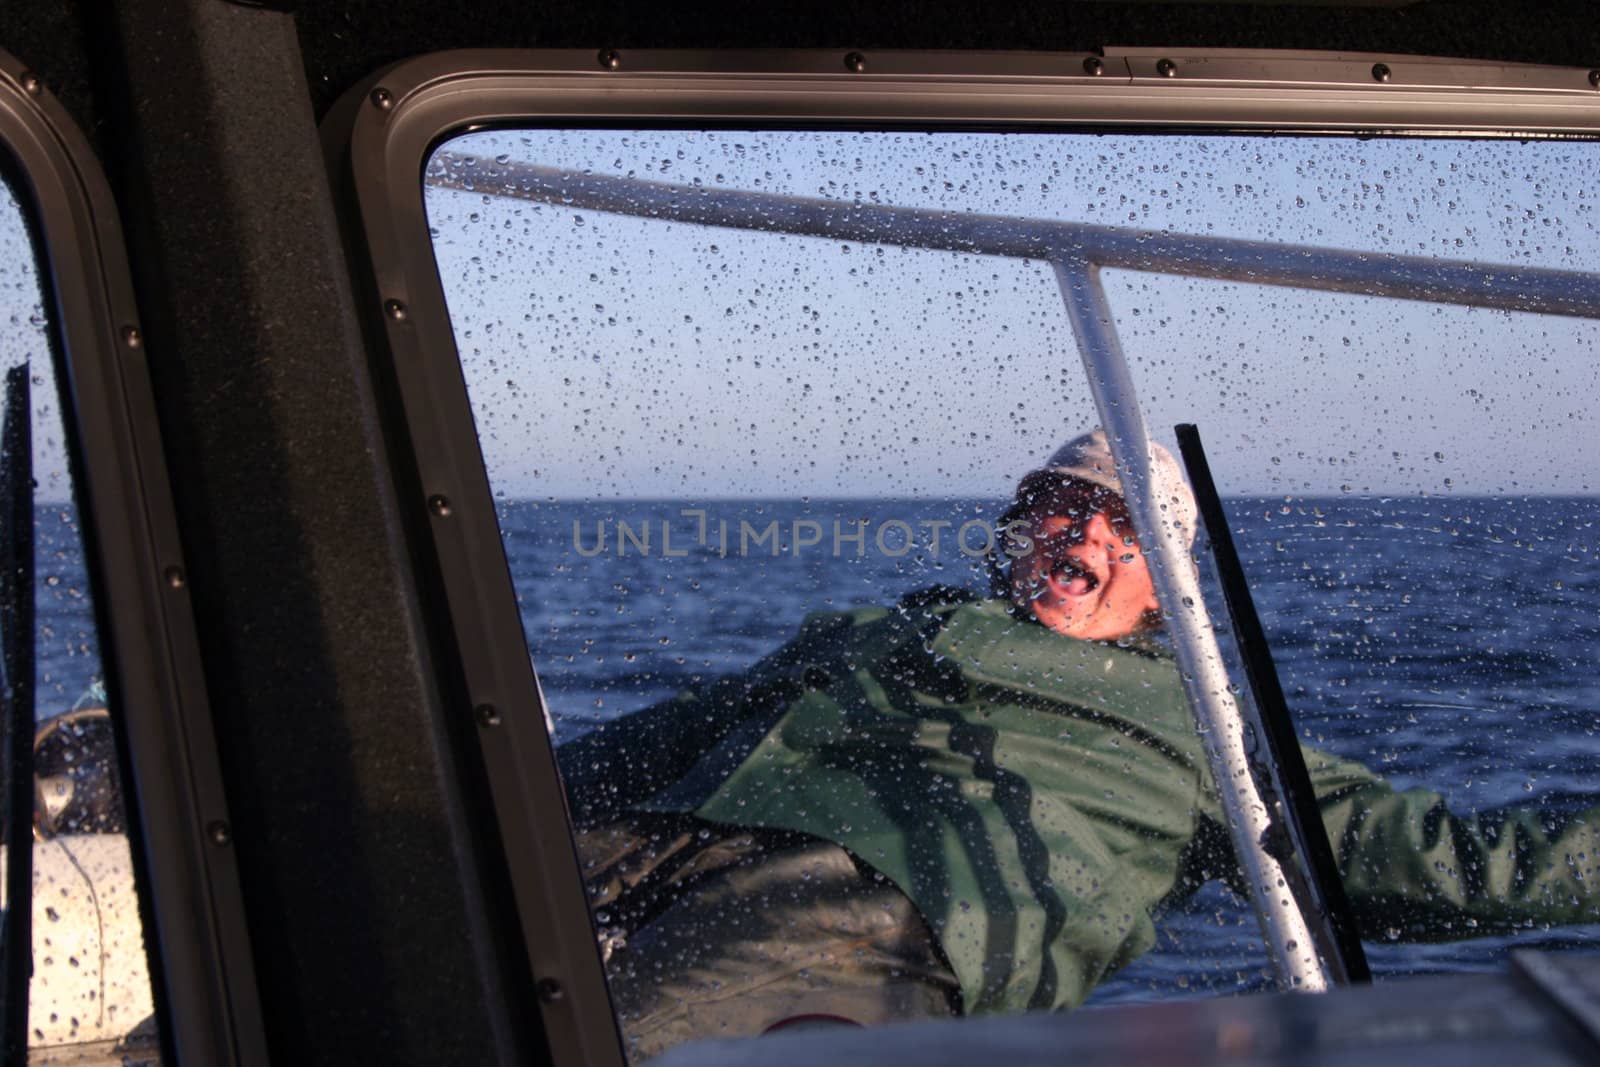 Deck hand on small fishing boat appears to be falling overboard as we look through a spray-spotted window